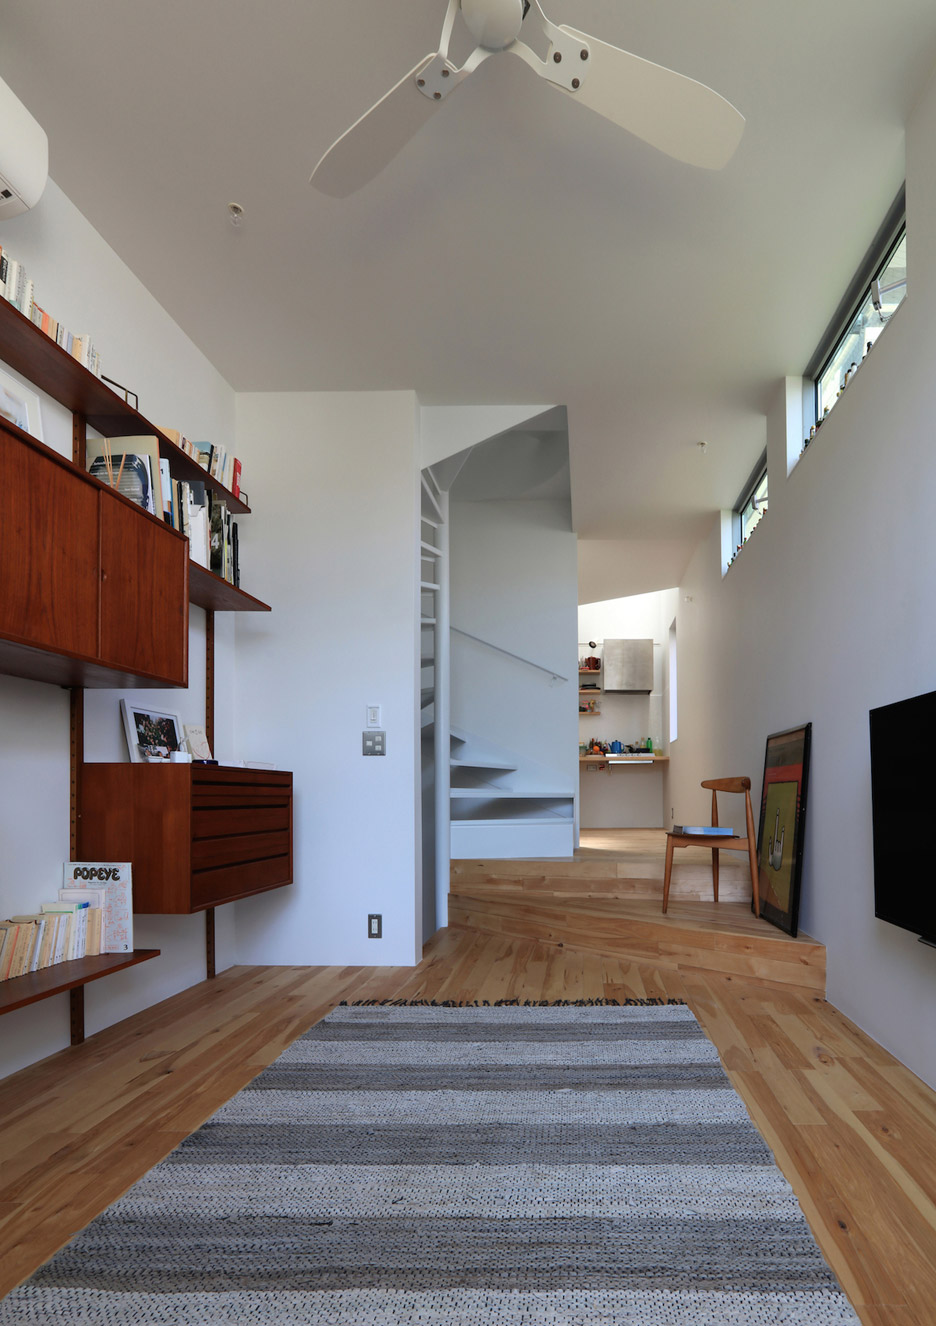 Four-metre-wide House in Hommachi built in Tokyo by Atelier HAKO Architects